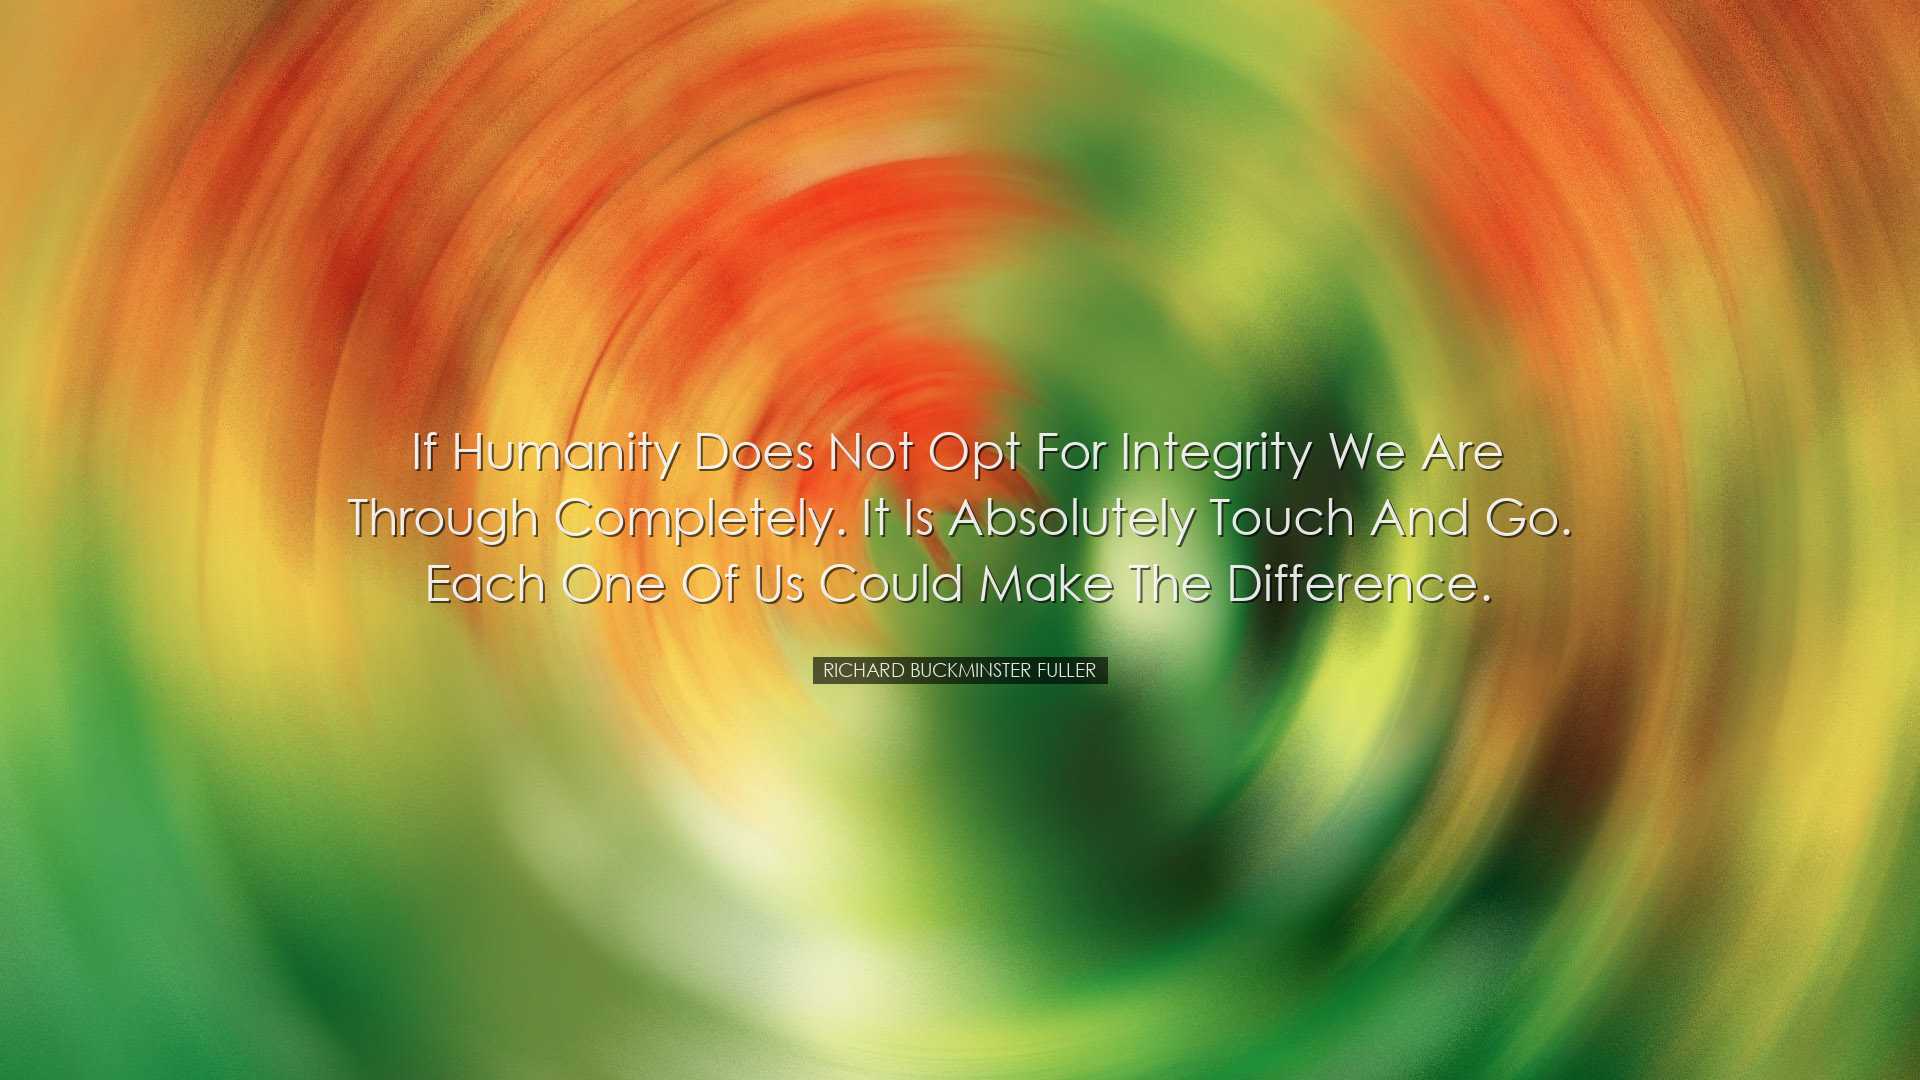 If humanity does not opt for integrity we are through completely.